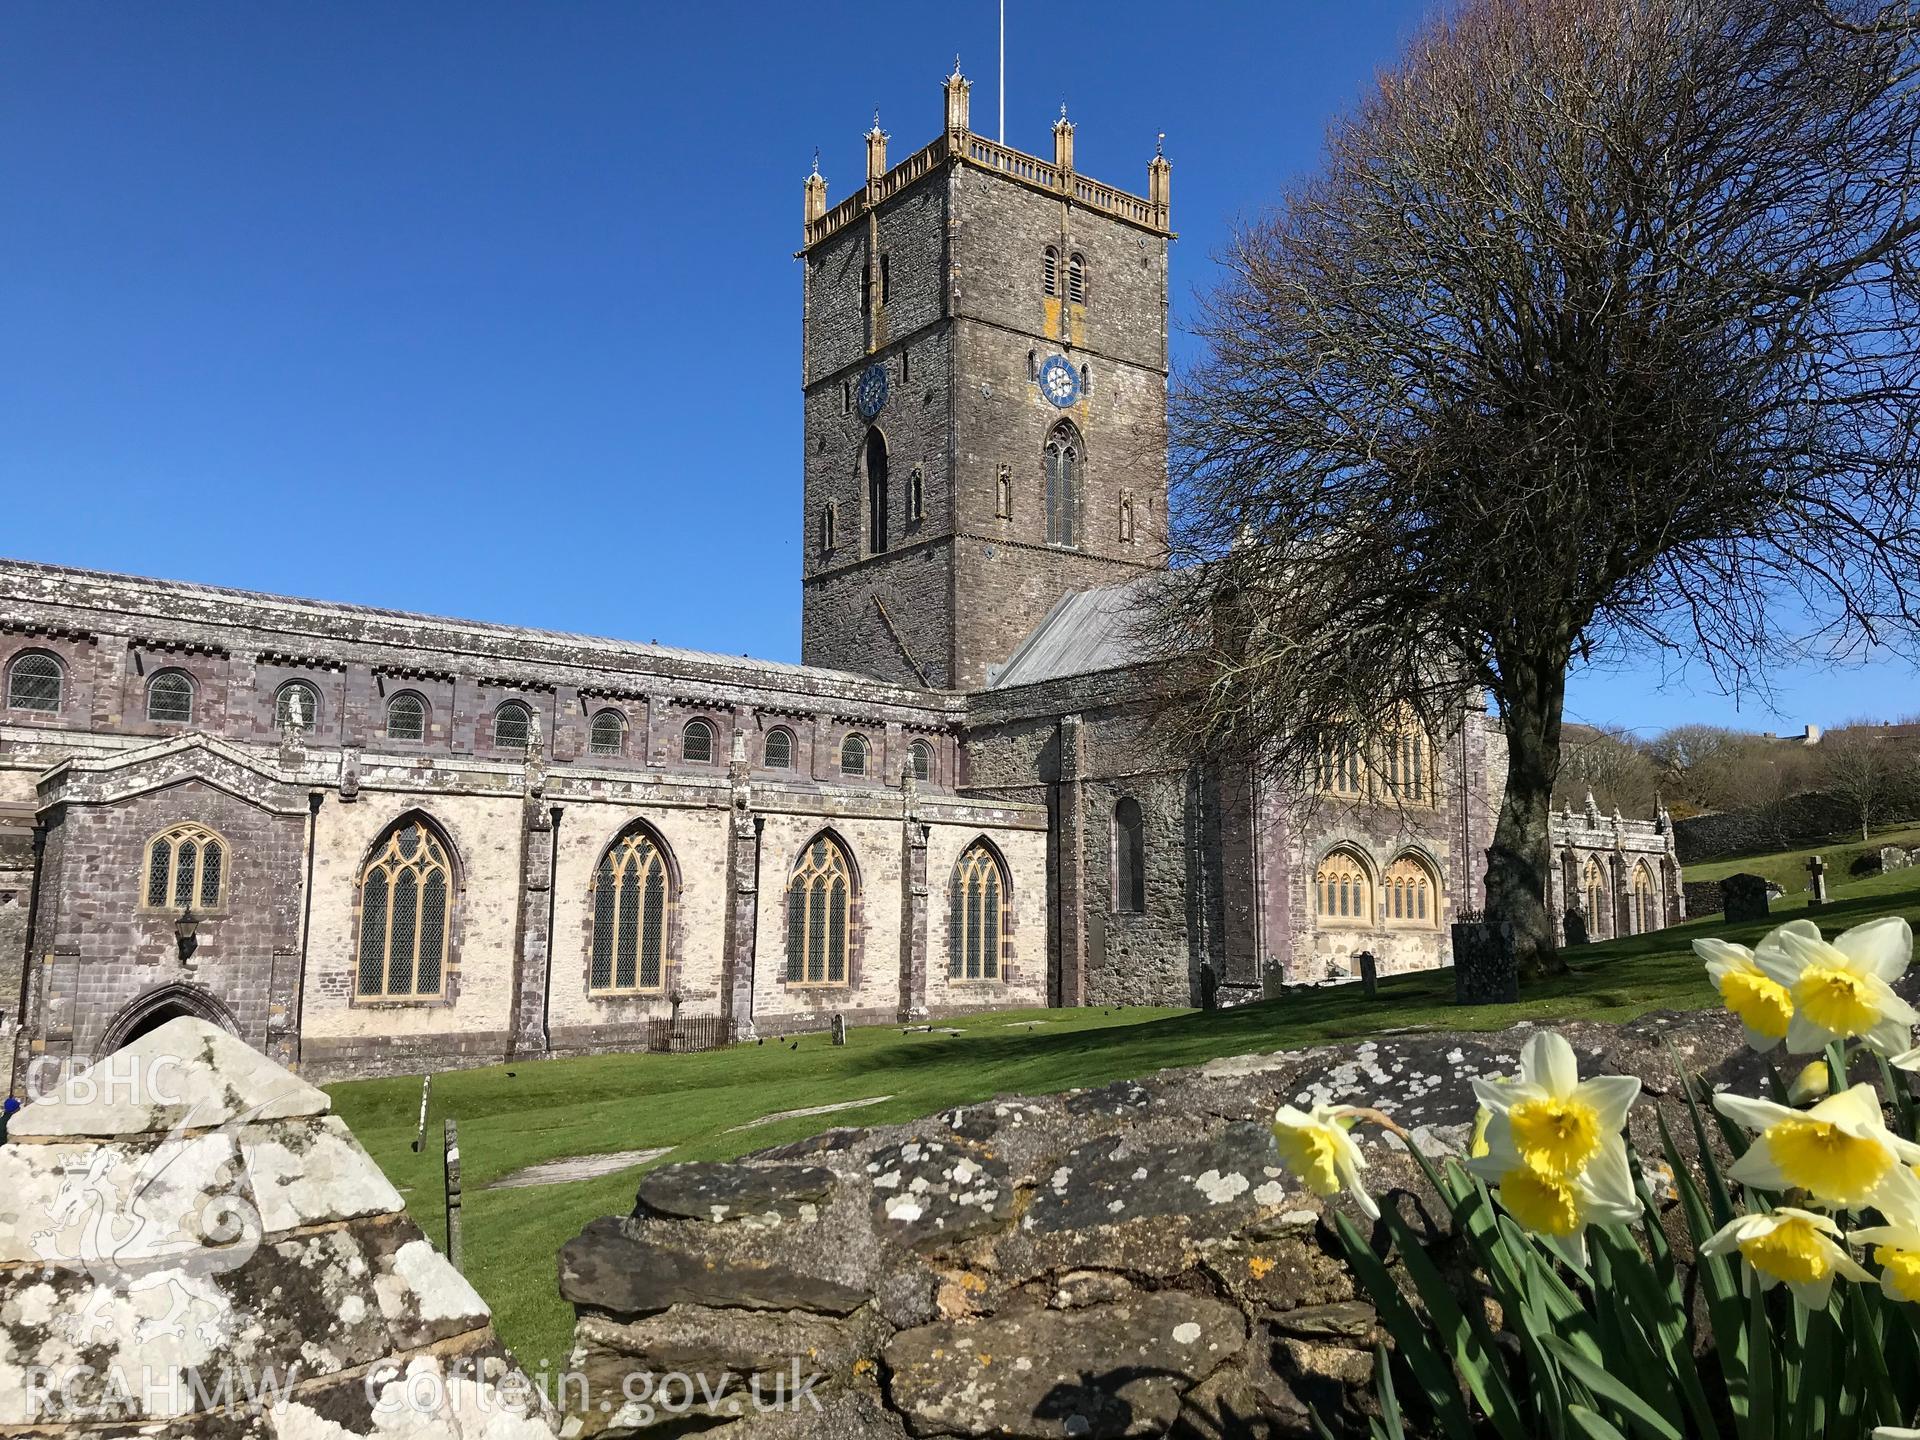 Colour photo showing view of St David's Cathedral, taken by Paul R. Davis, 2018.